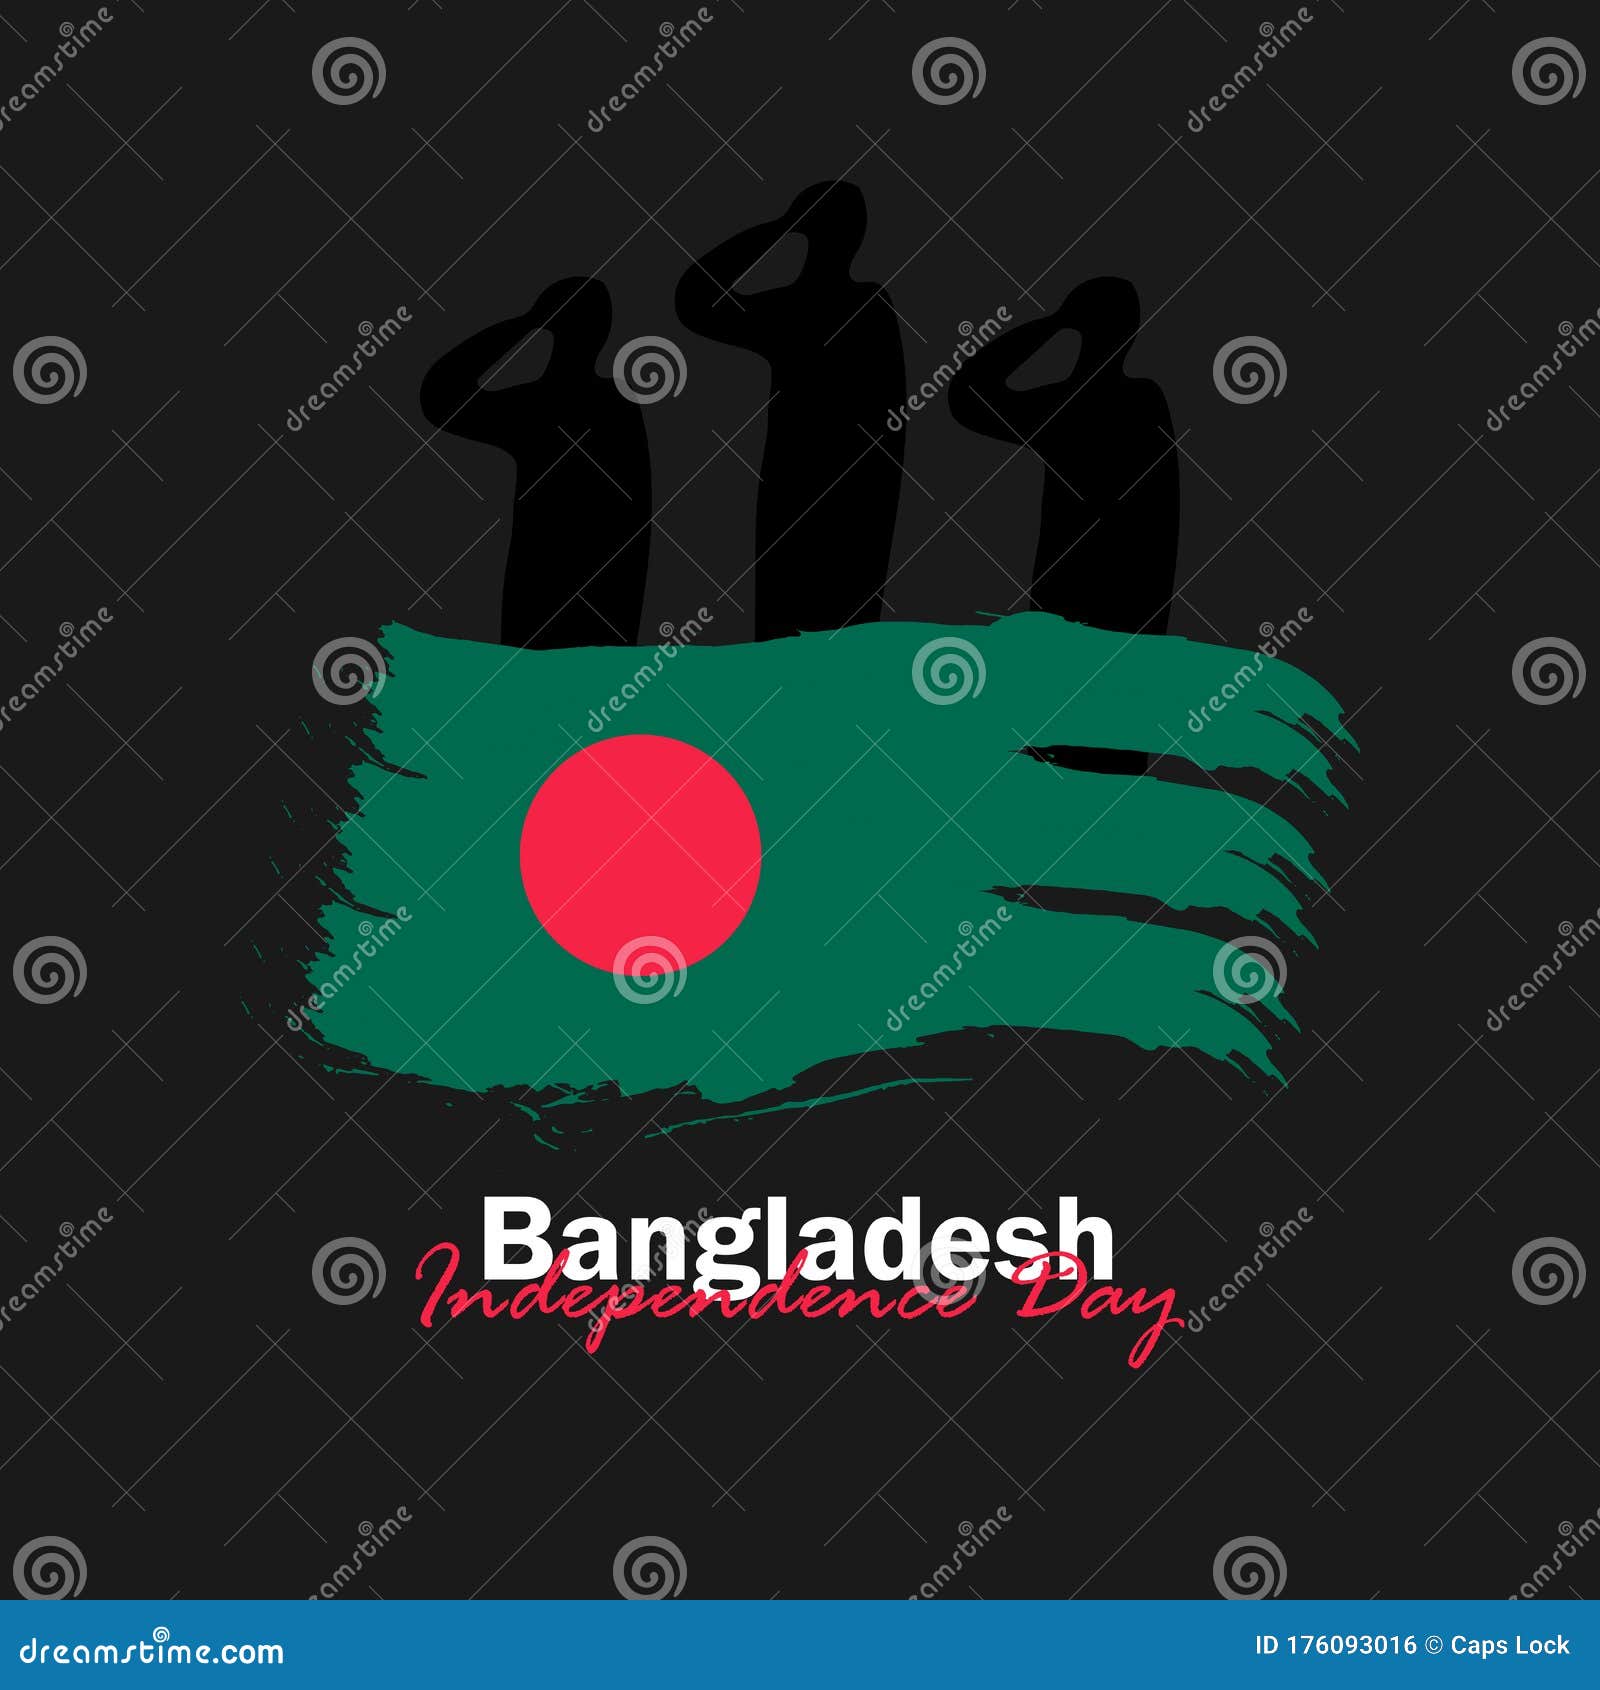 Celebration of Bangladesh National Day on March 26 Stock Vector